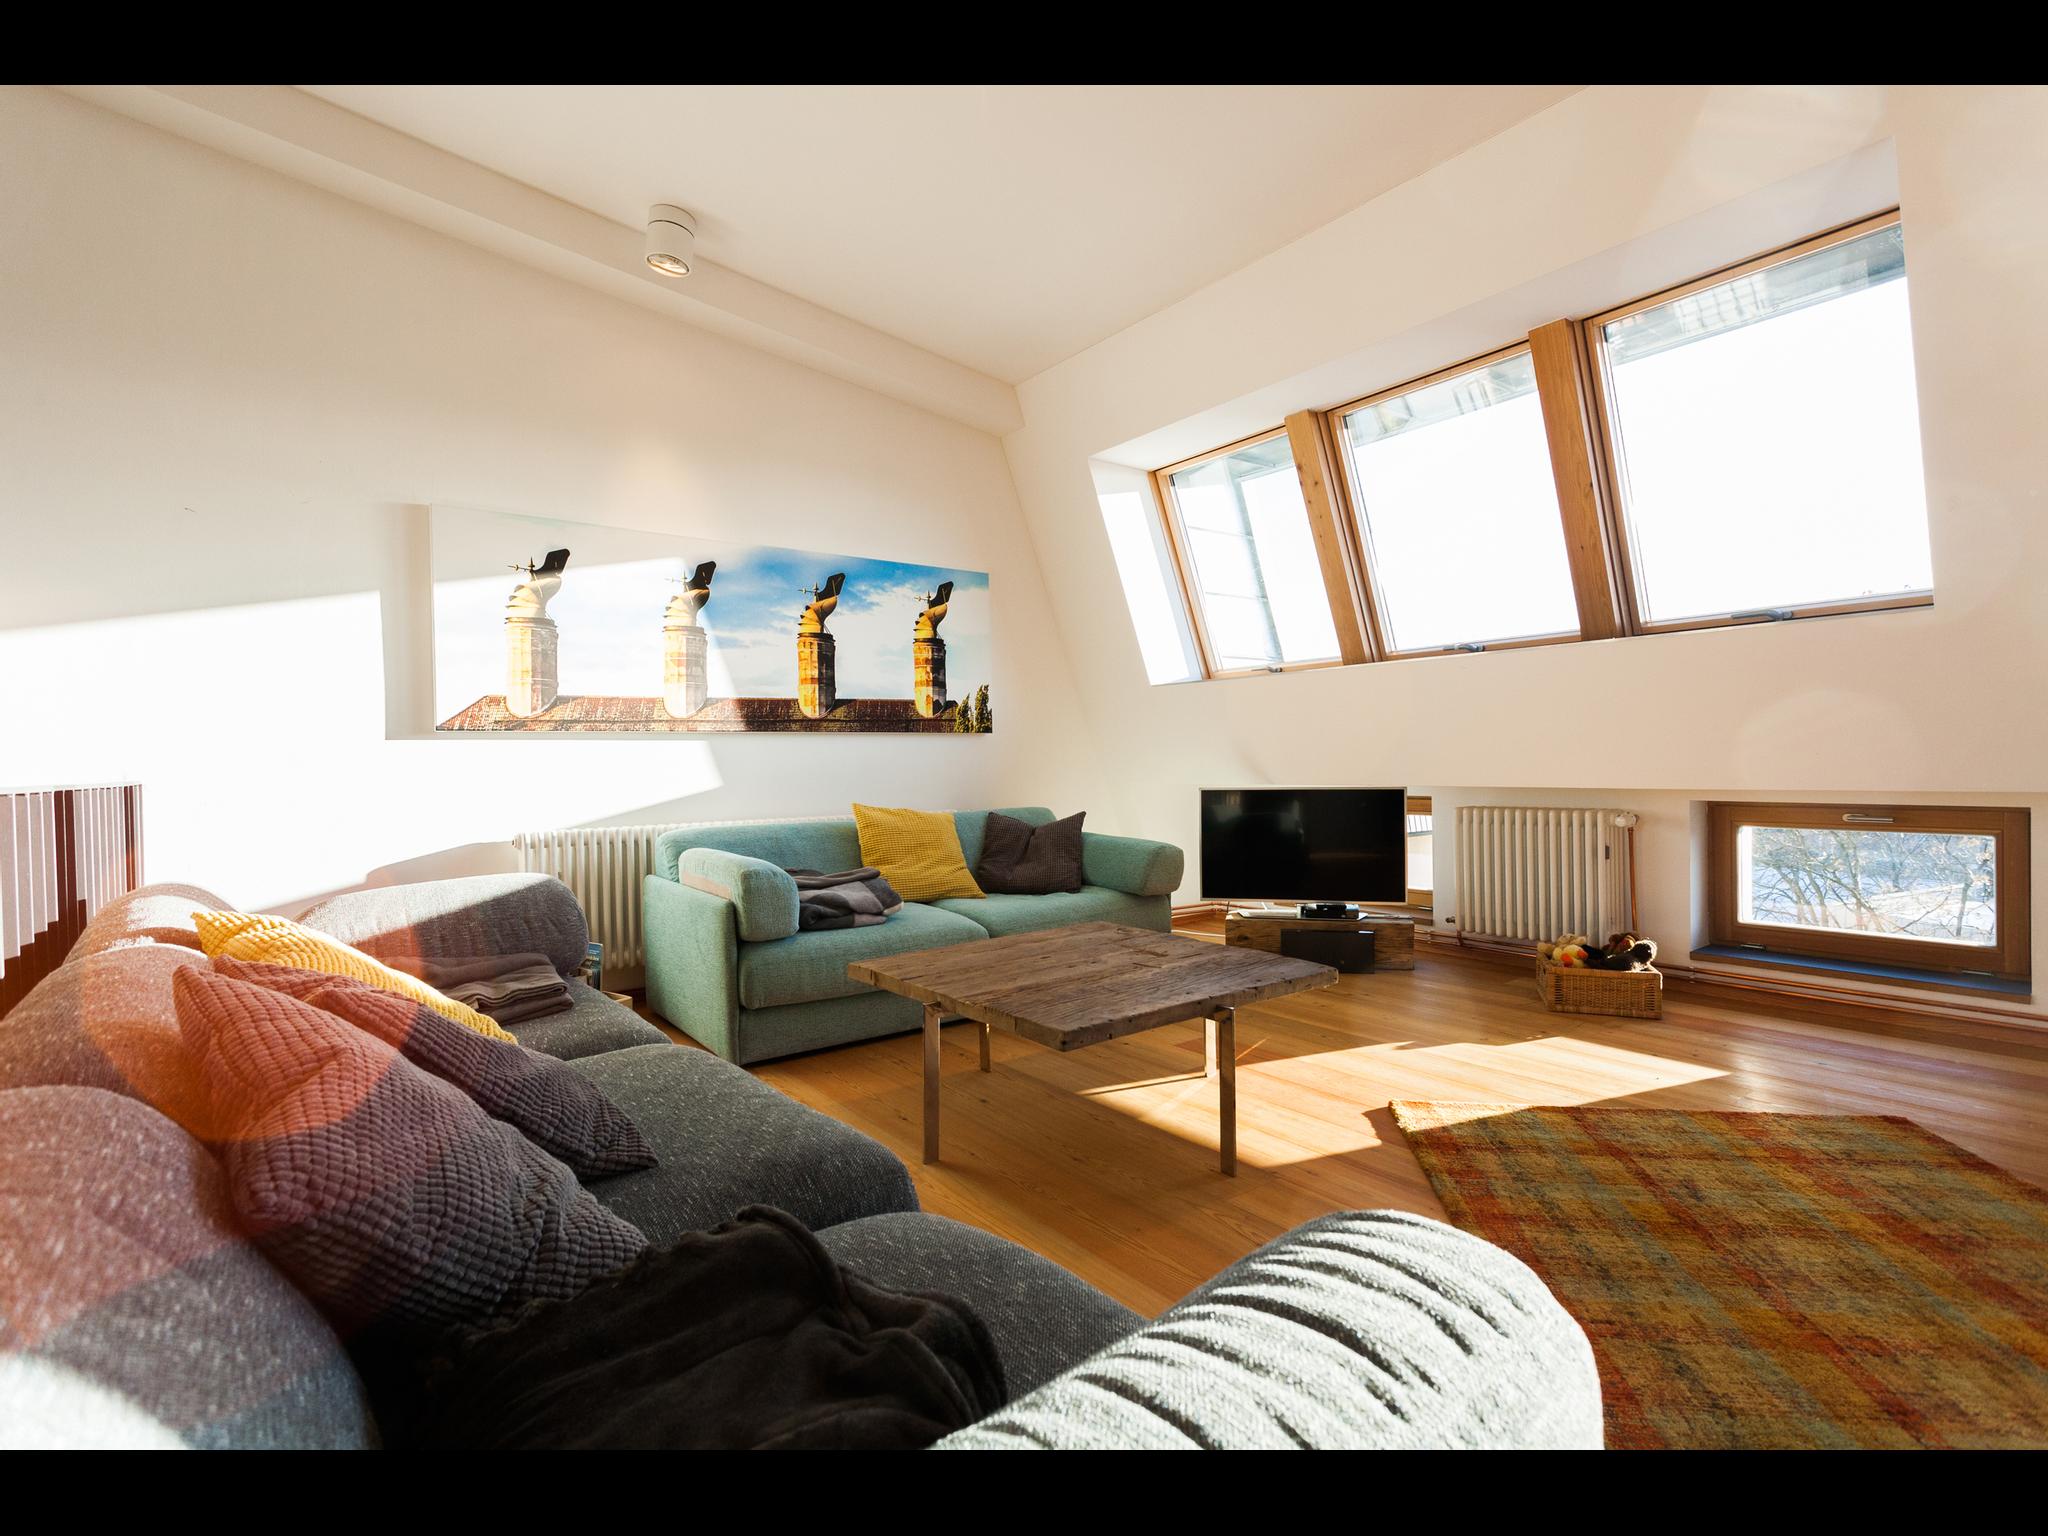 Perle - Luxury furnished apartment in Berlin